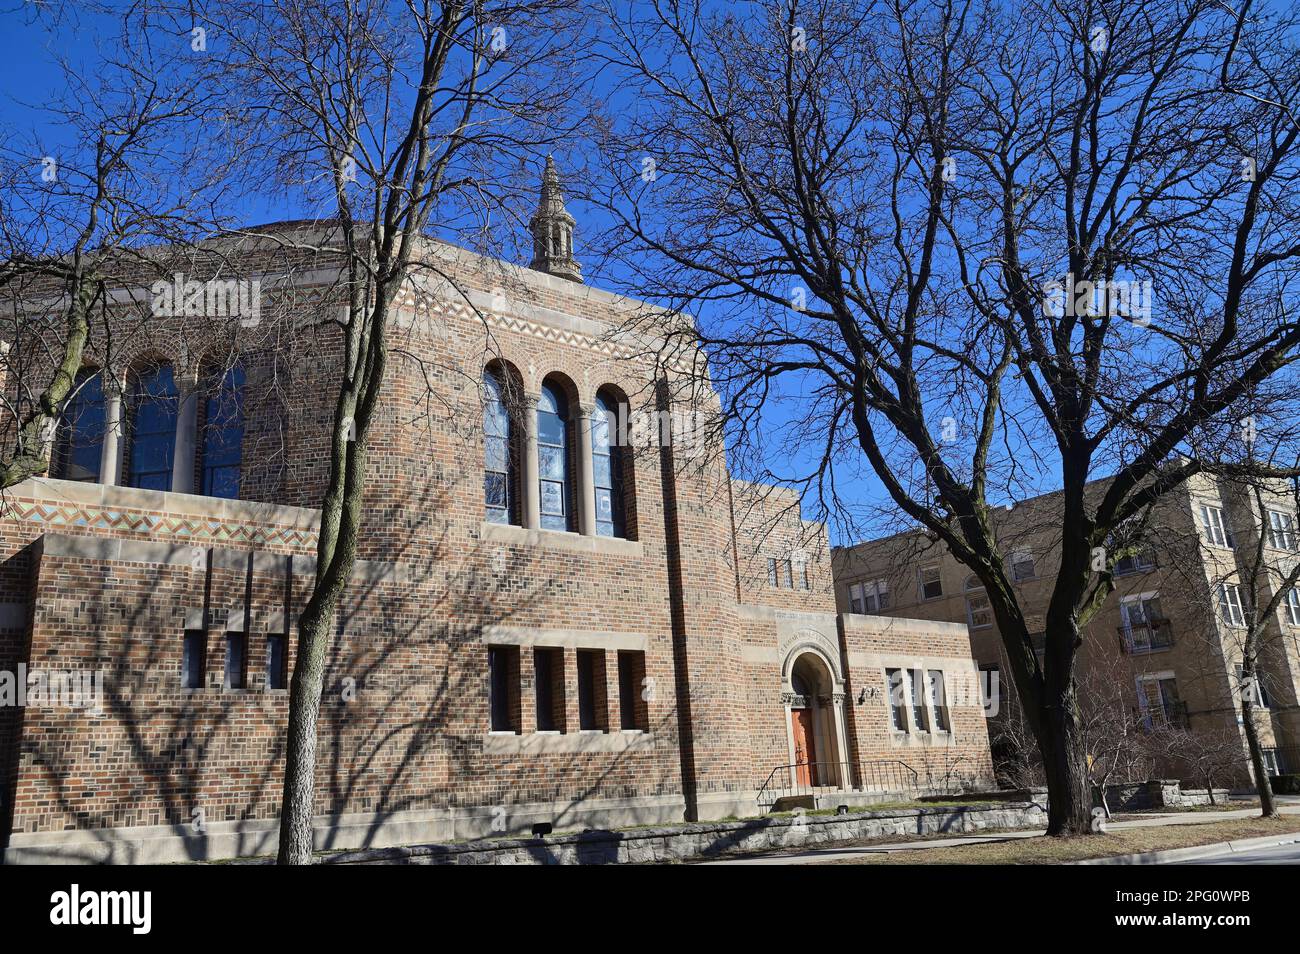 Chicago, Illinois, USA. KAM Isaiah Israel, a synagogue in the Kenwood neighborhood the city's South Side. Stock Photo